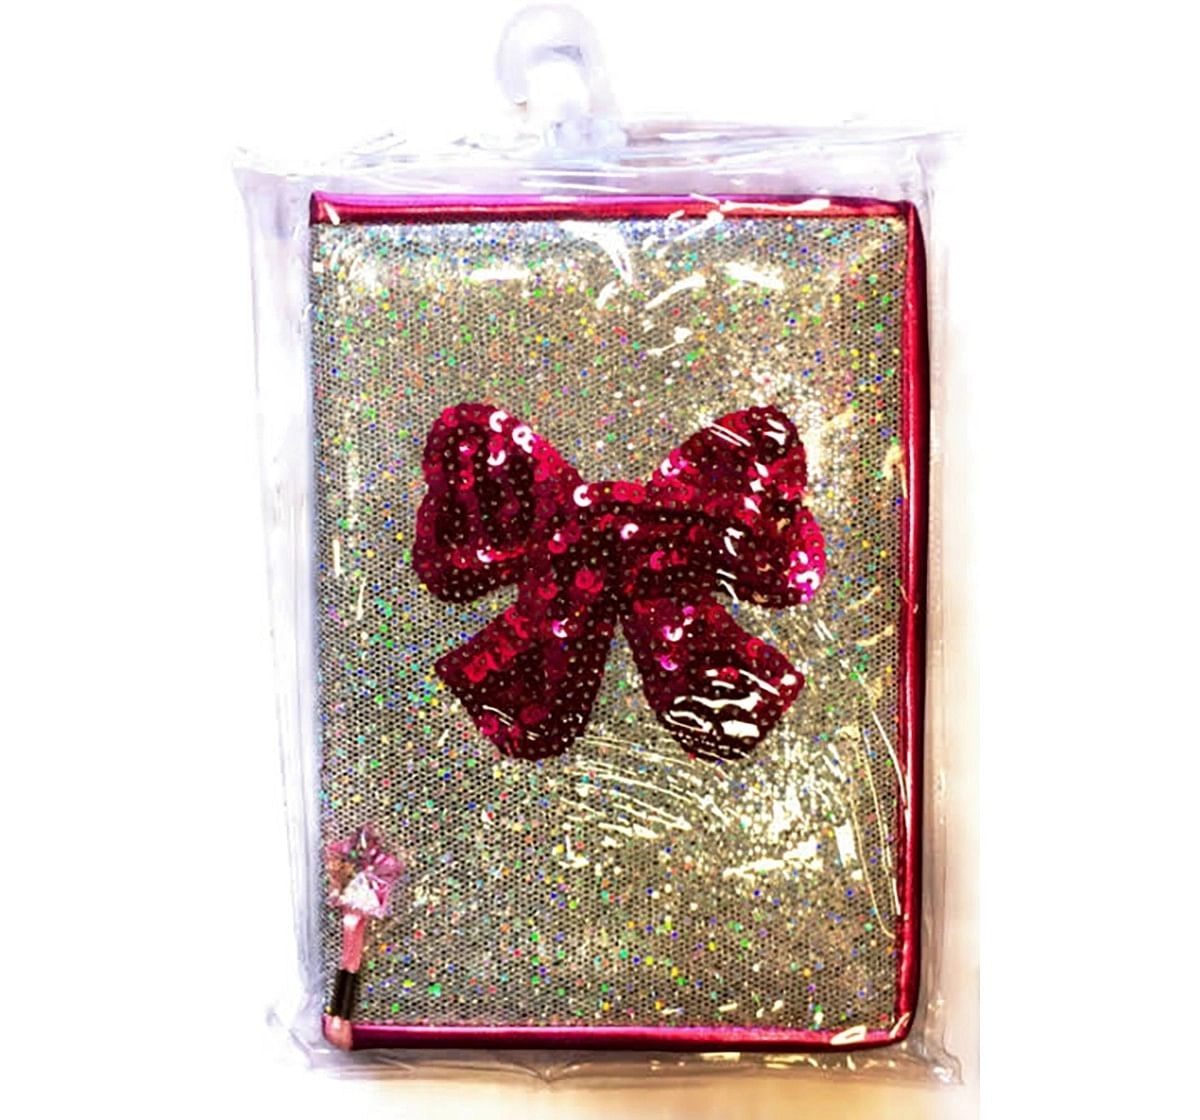  Mirada Bow With Glitter  Notebook - Study & Desk Accessories for Kids age 3Y+ (Silver)